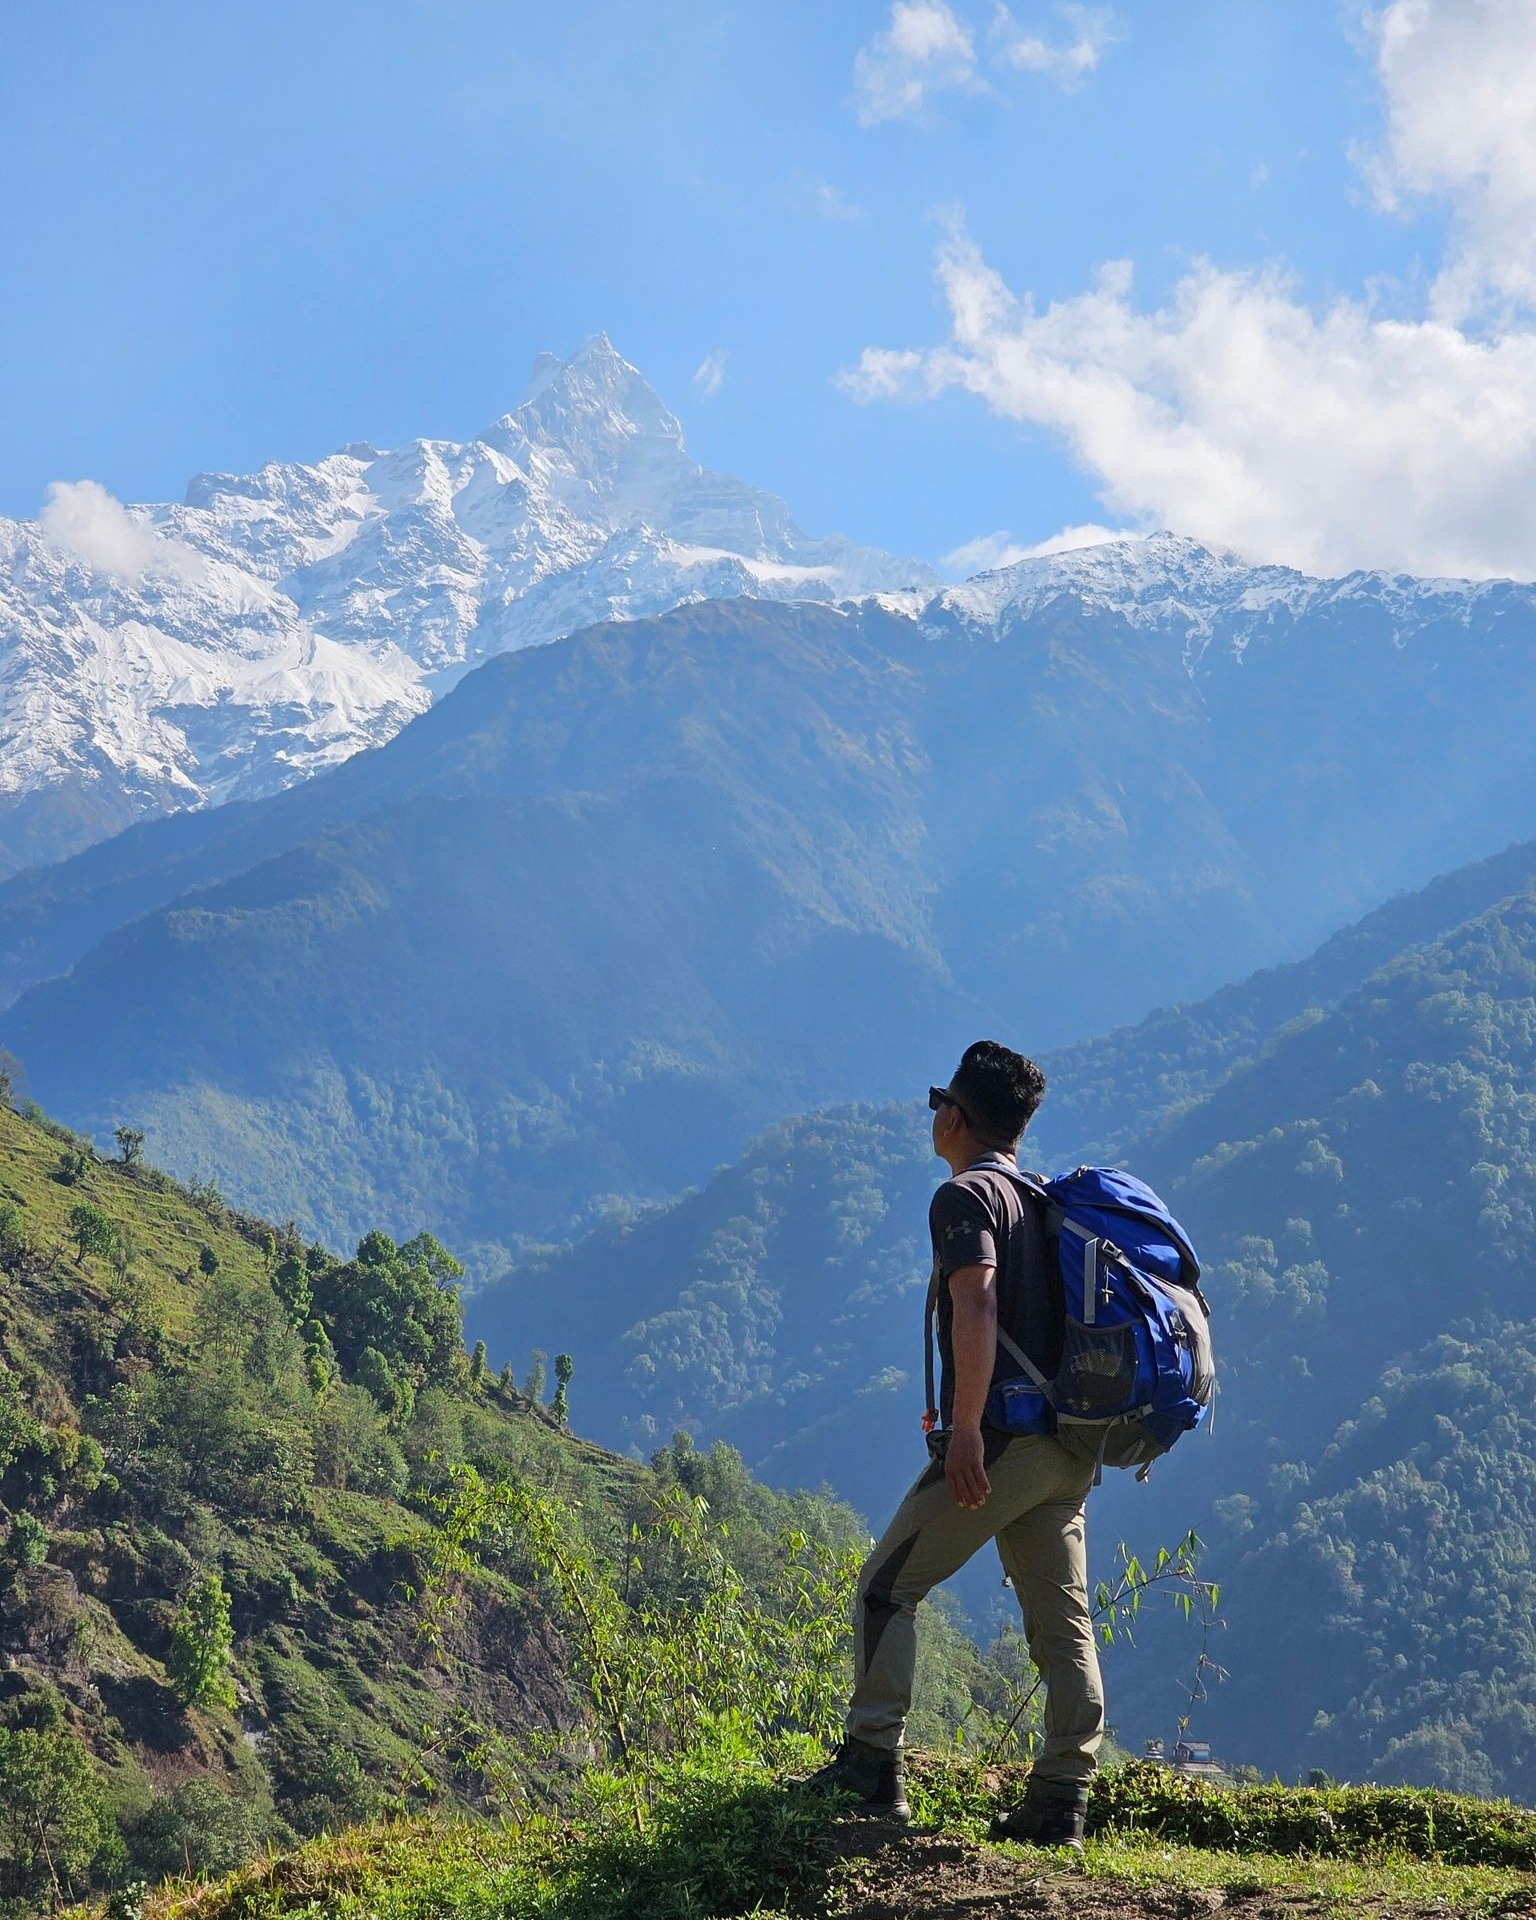 When is the Best time to go Trekking in Nepal?